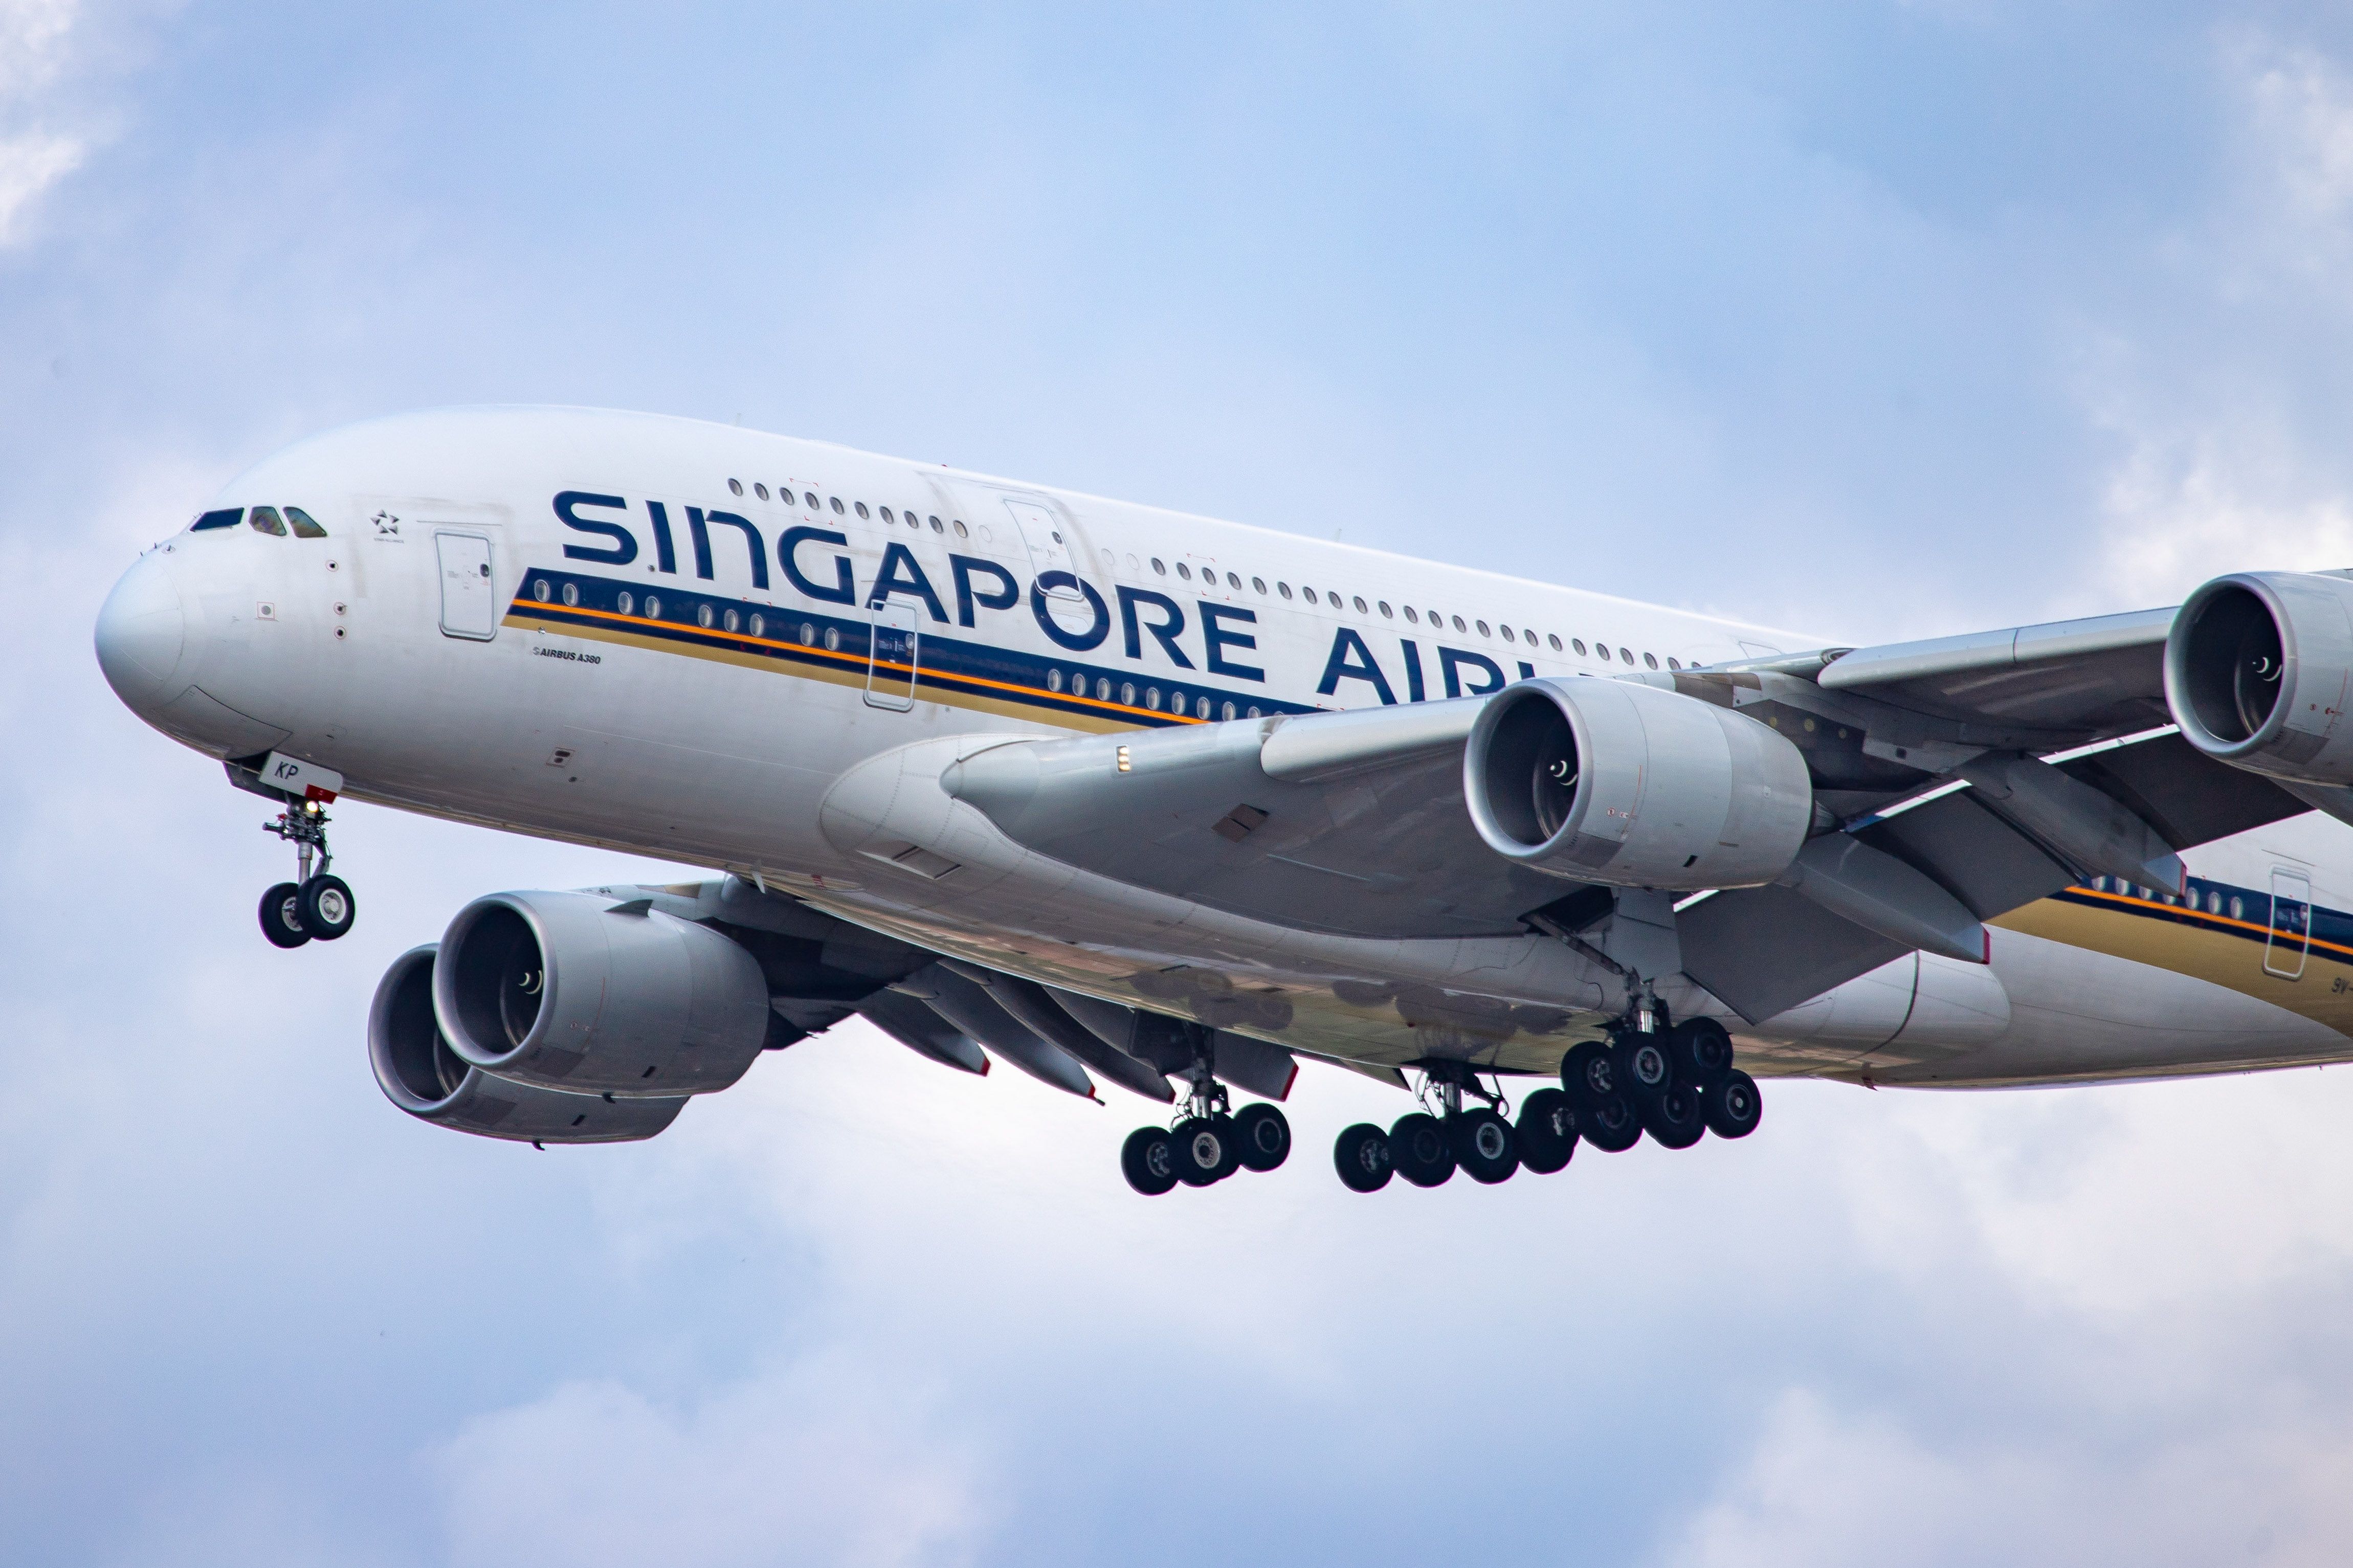 A Singapore Airlines Airbus A380 seen on final approach to London Heathrow.